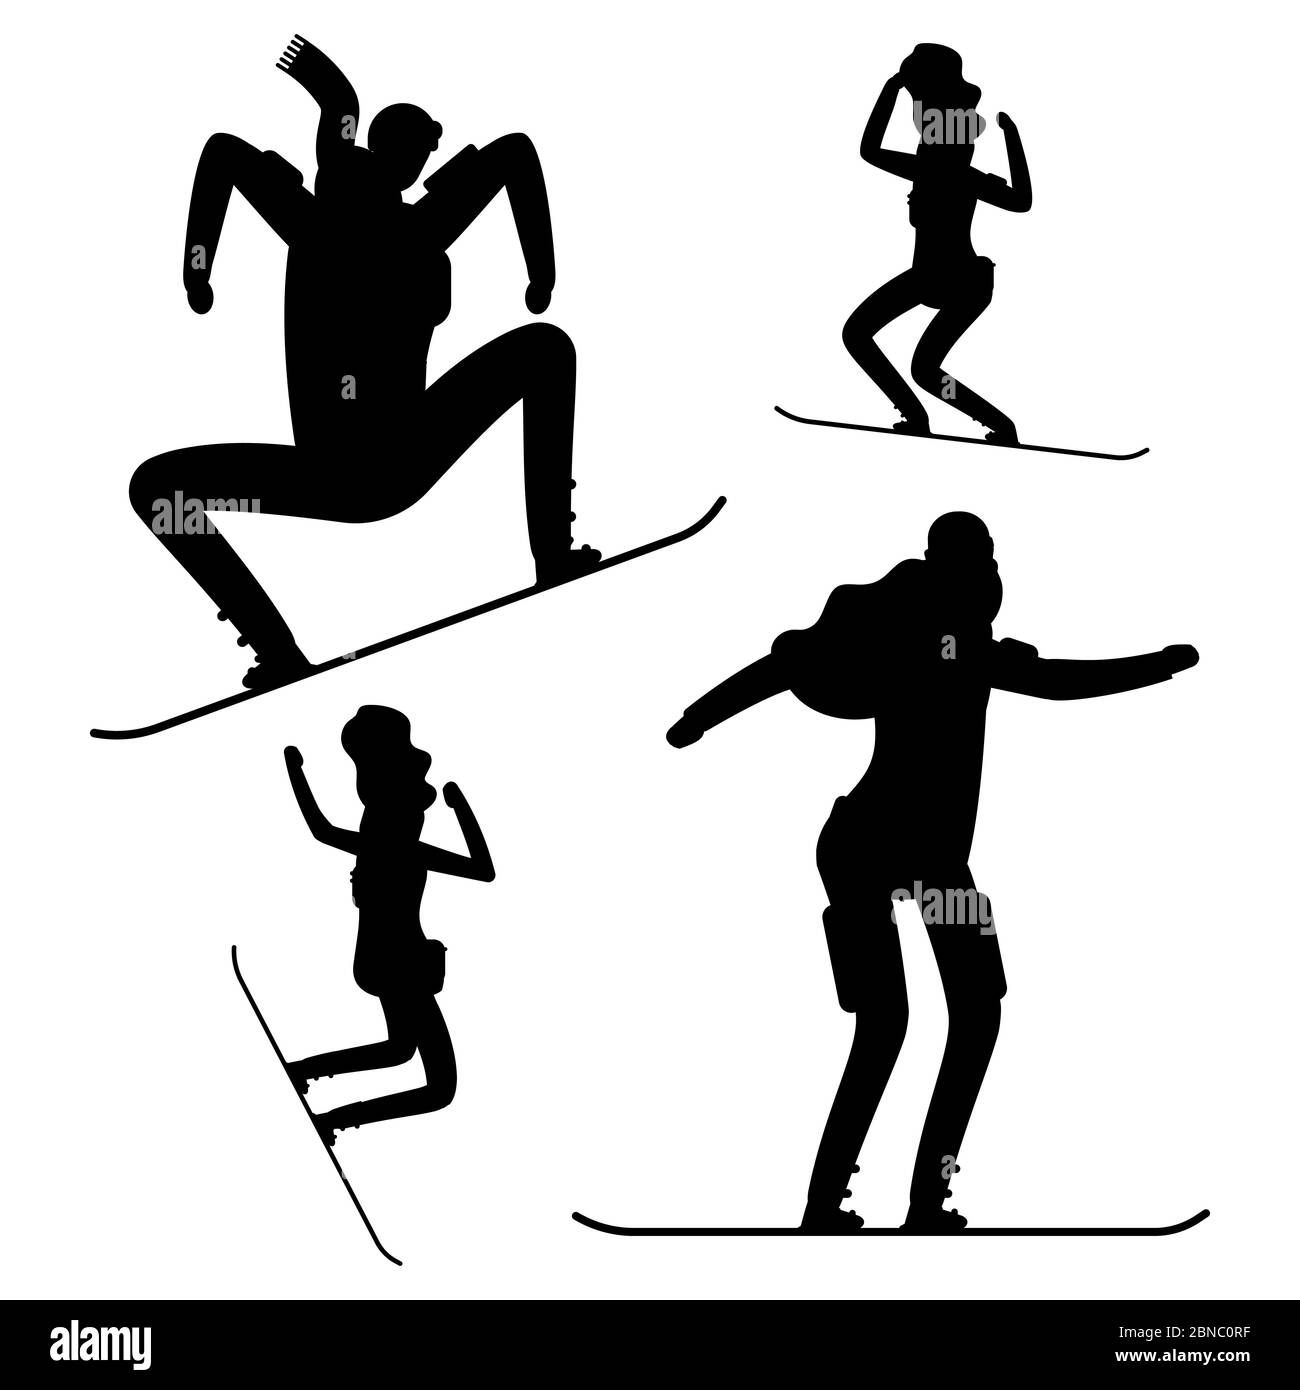 Snowboarding people black silhouettes isolated on white background. Active sport man, vector illustration Stock Vector